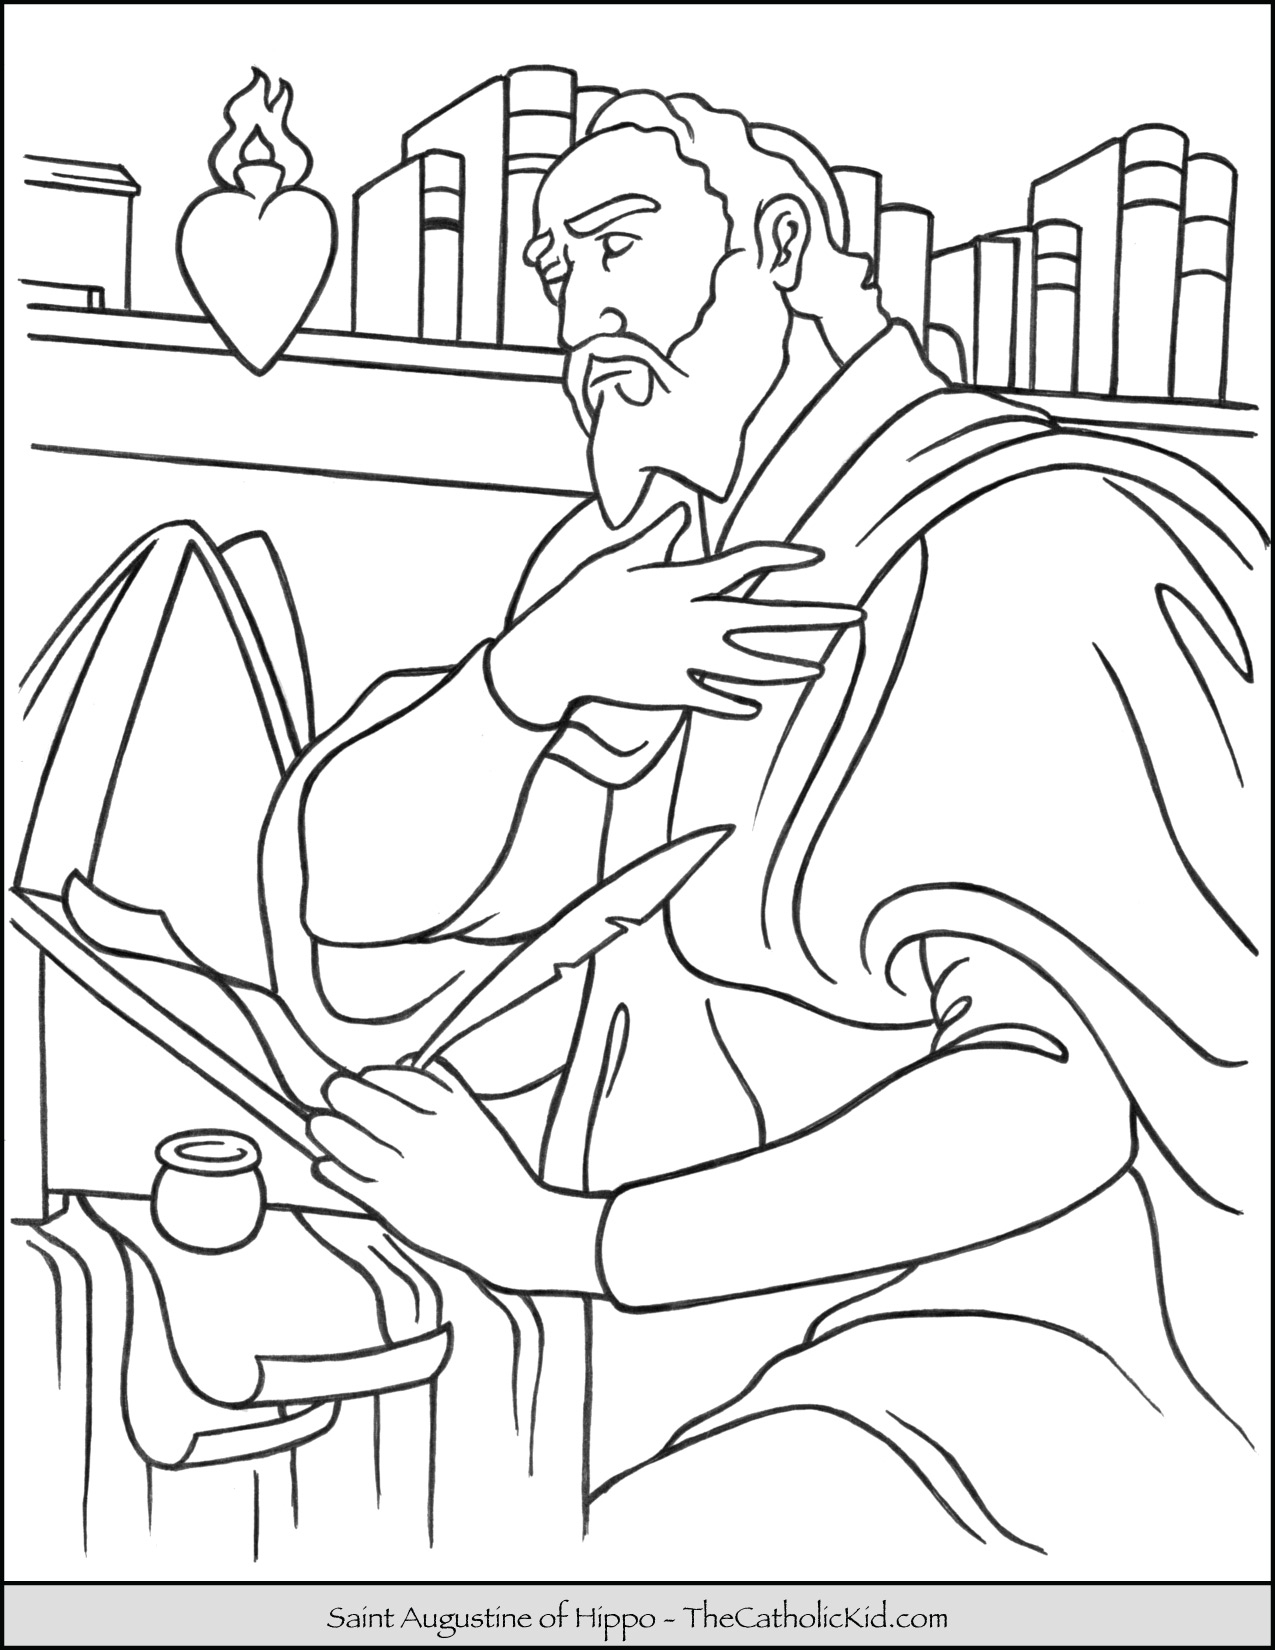 St Augustine Coloring Page Saint Augustine Coloring Page Thecatholickid